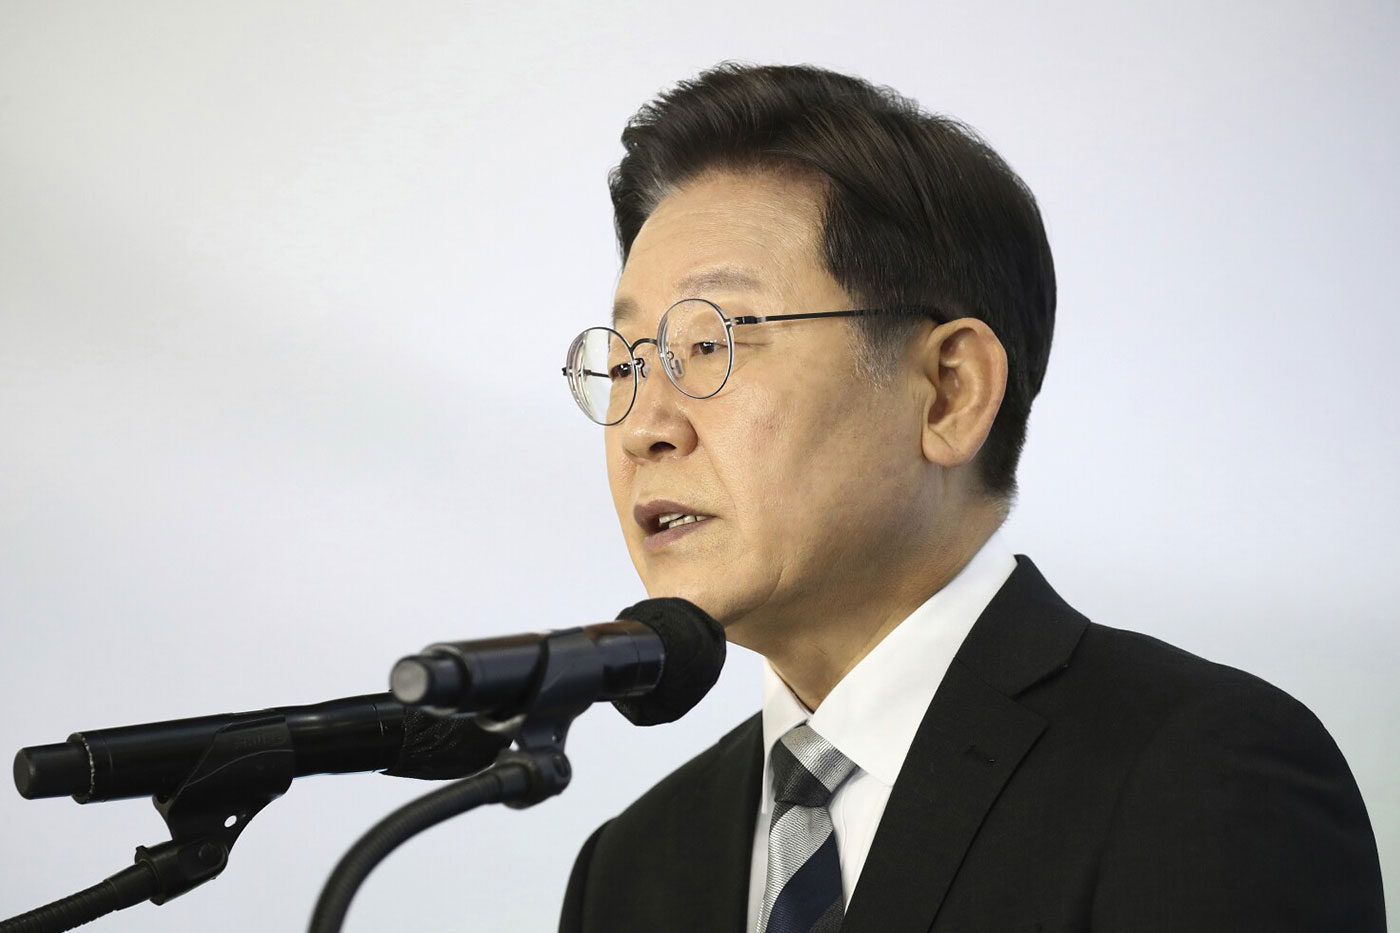 Hair fall becomes a debating point in South Korean presidential elections